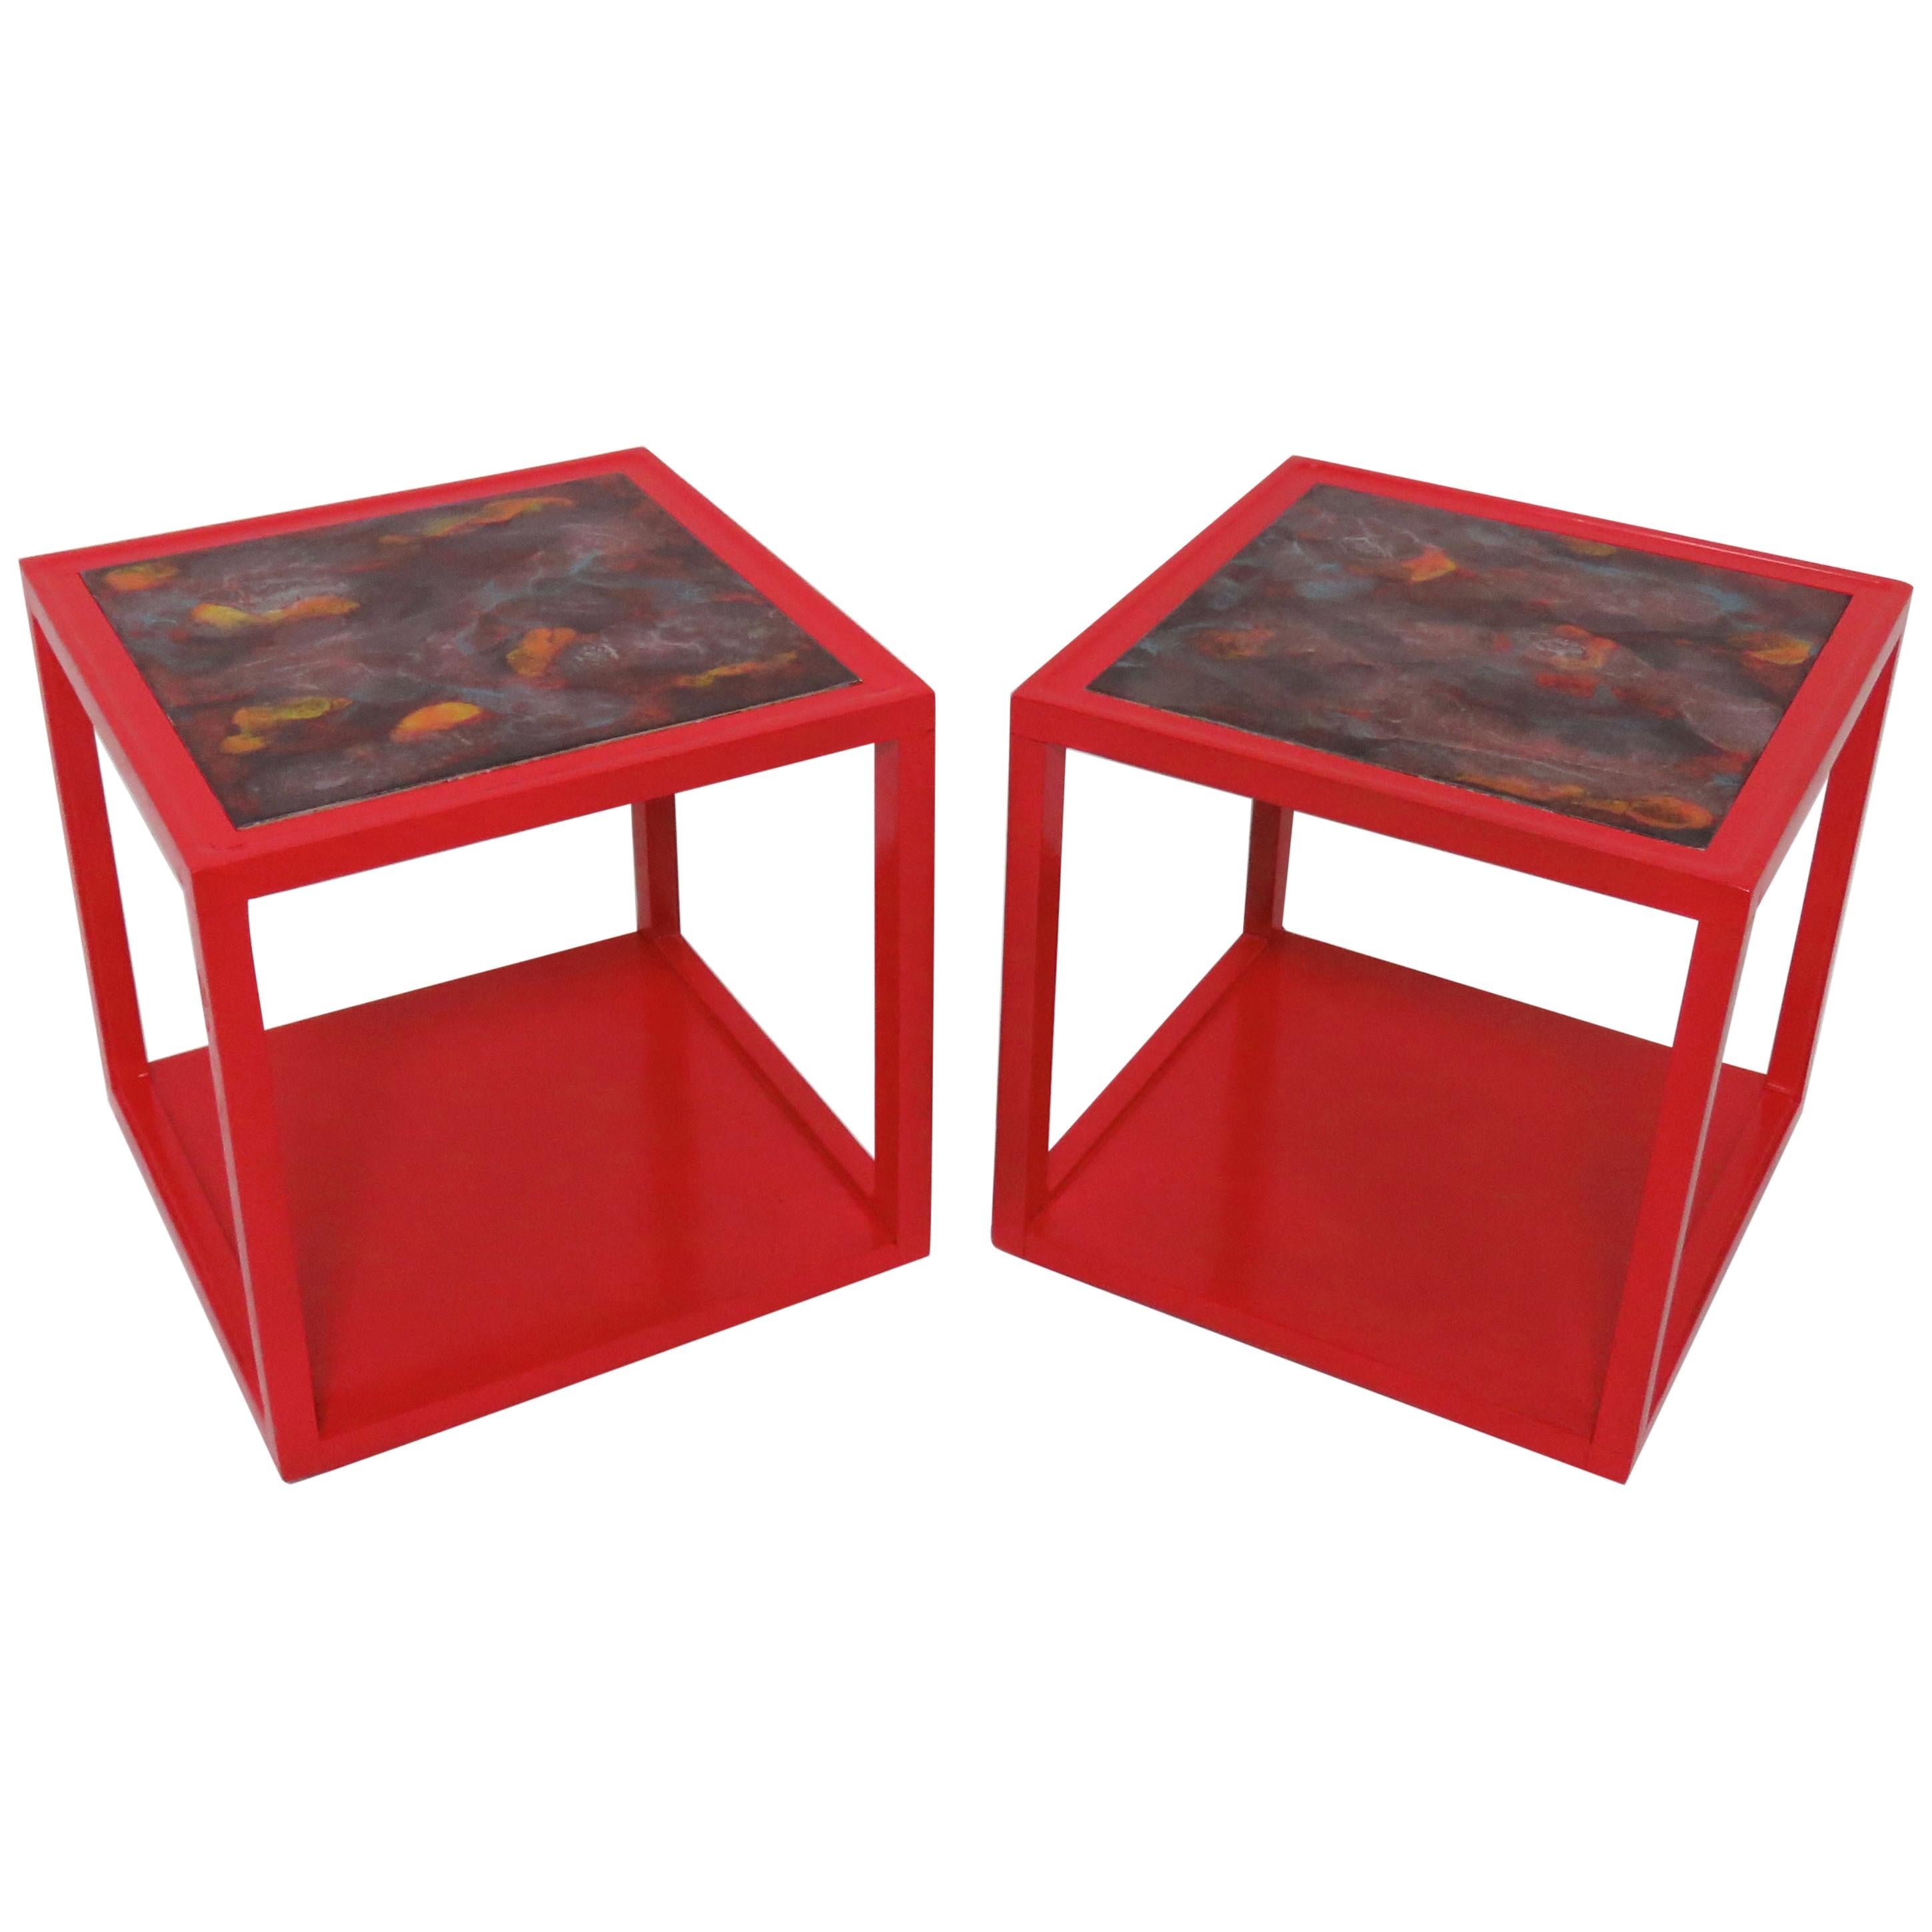 Pair of Edward Wormley for Drexel Precedent Side Tables with Tile Tops